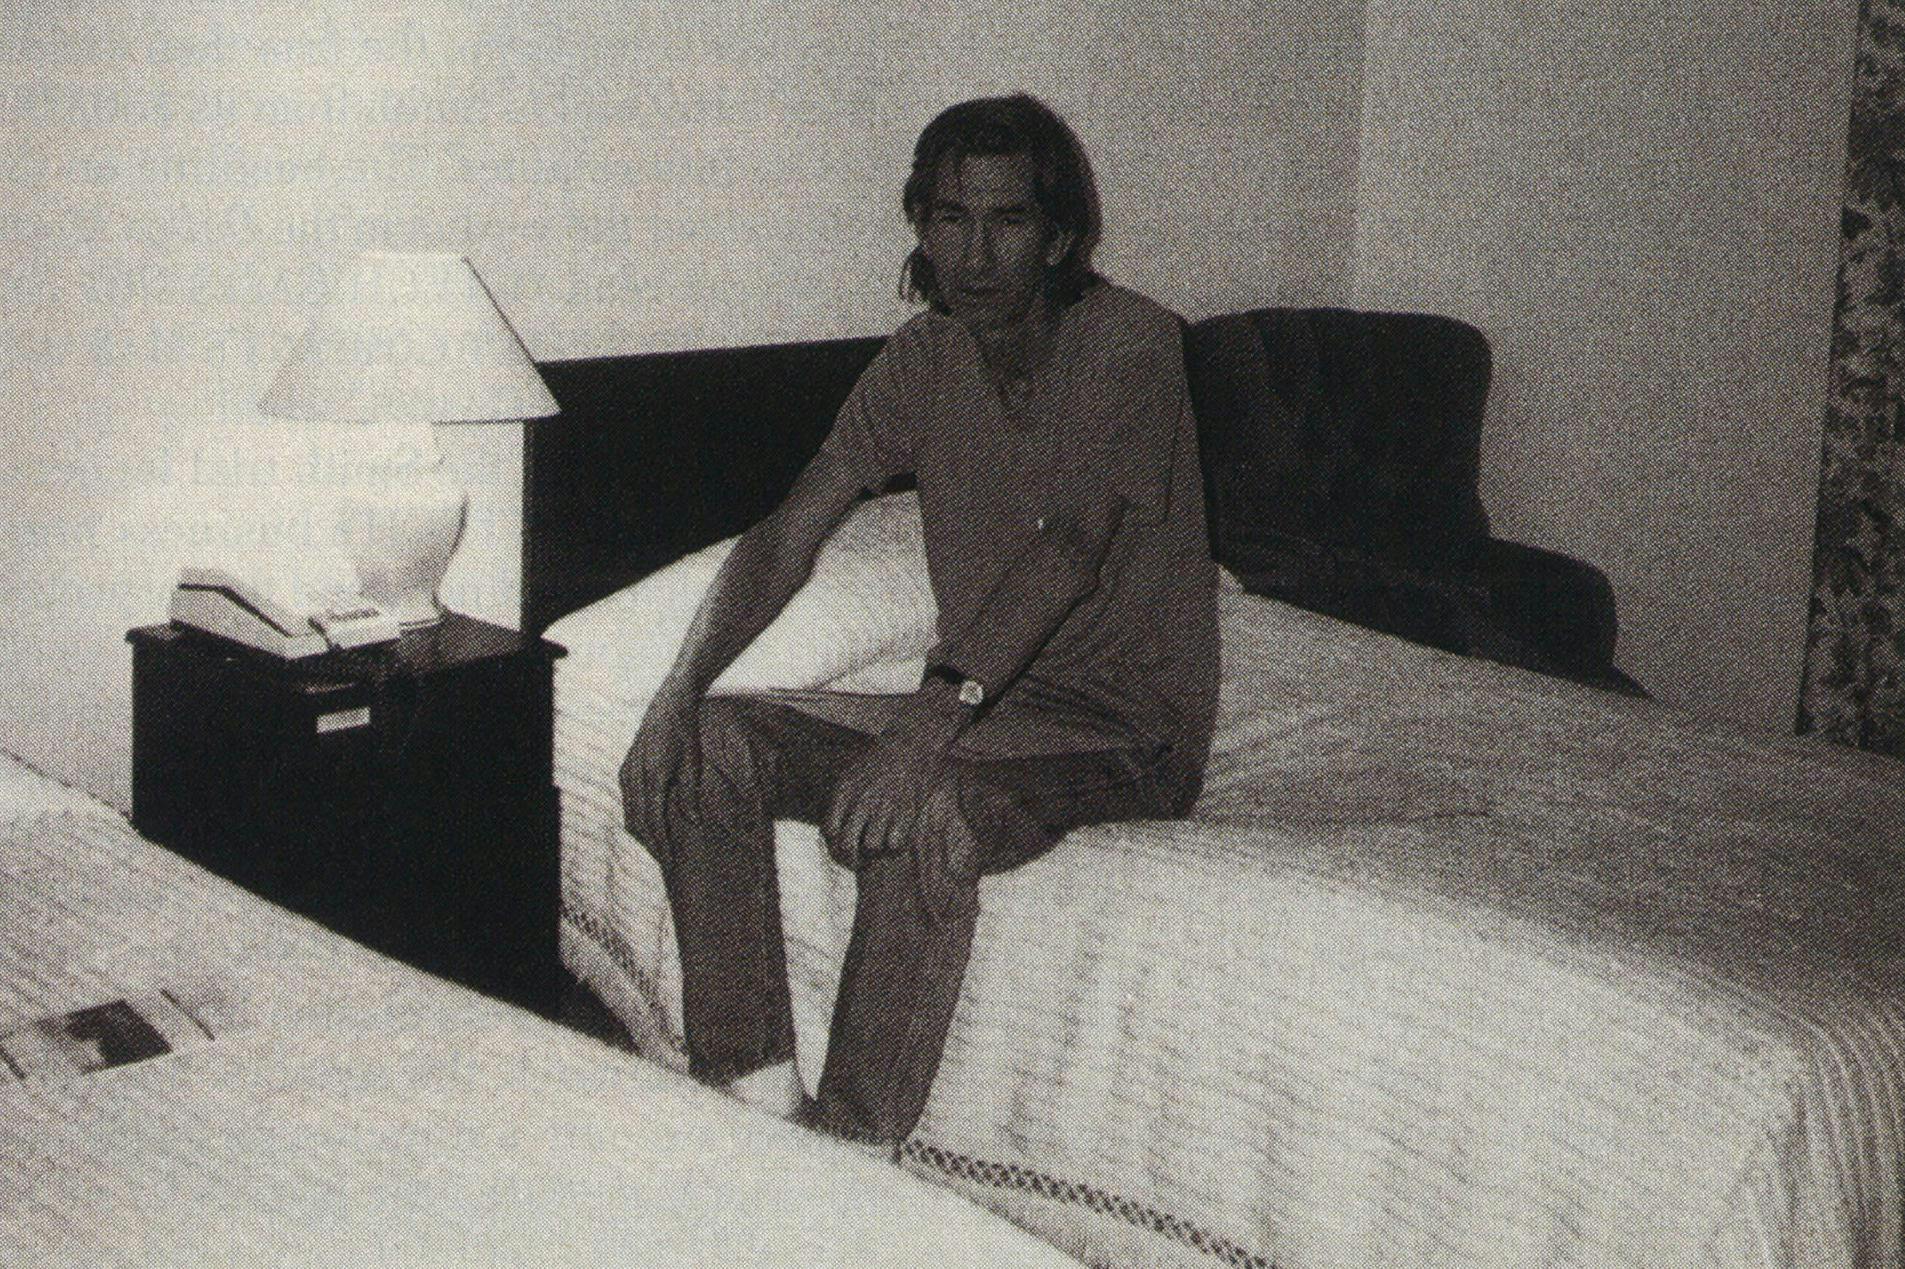 Townes Van Zandt on tour, when his drinking landed him in various detoxification programs.